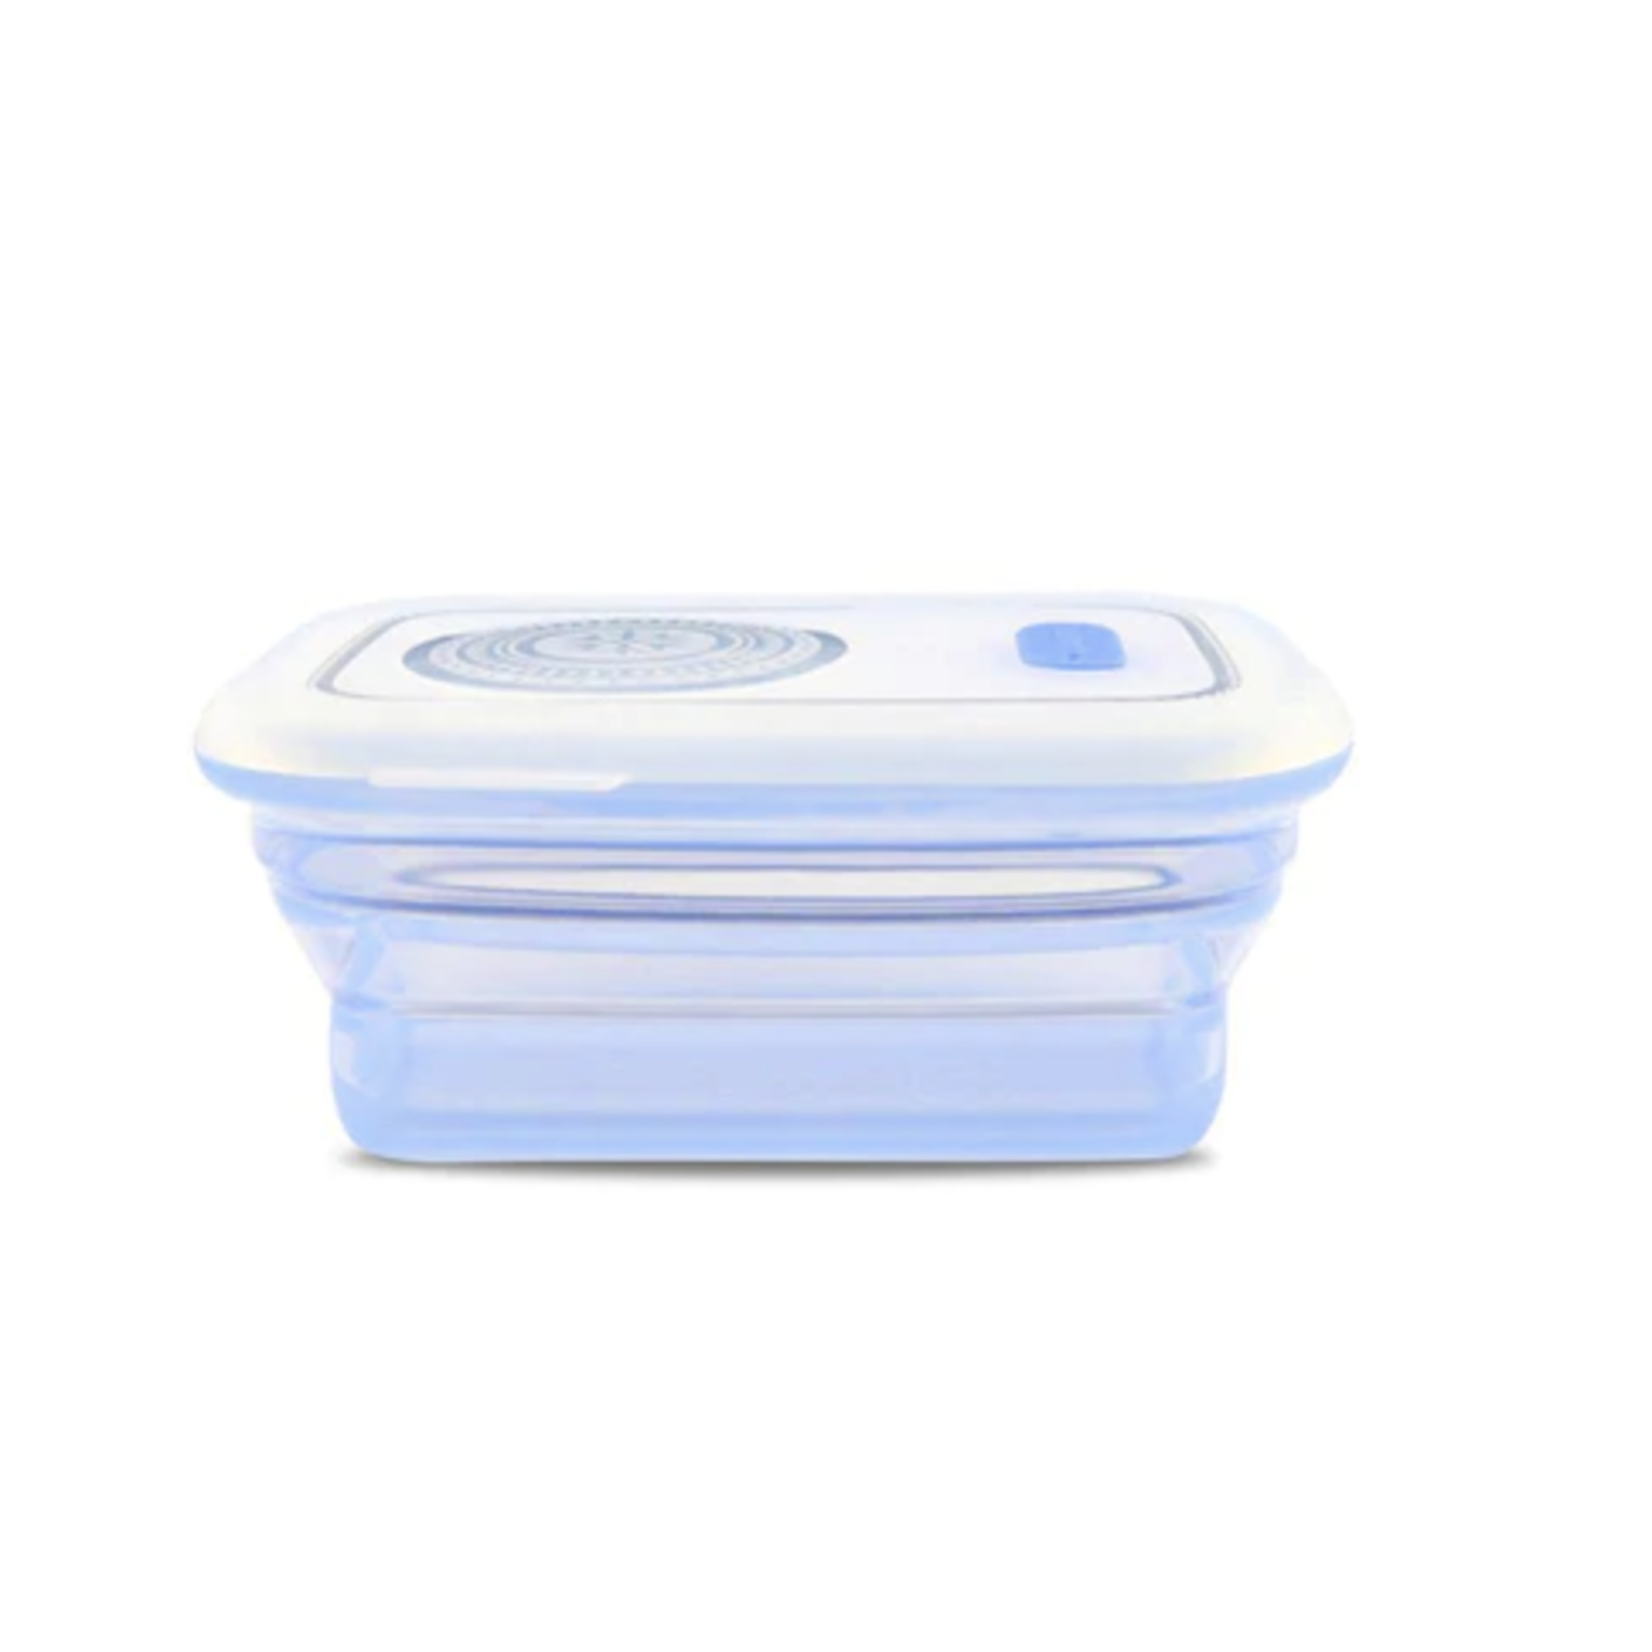 Haakaa Silicone Collapsible Food Storage Container New & Improved Blue 1160ml